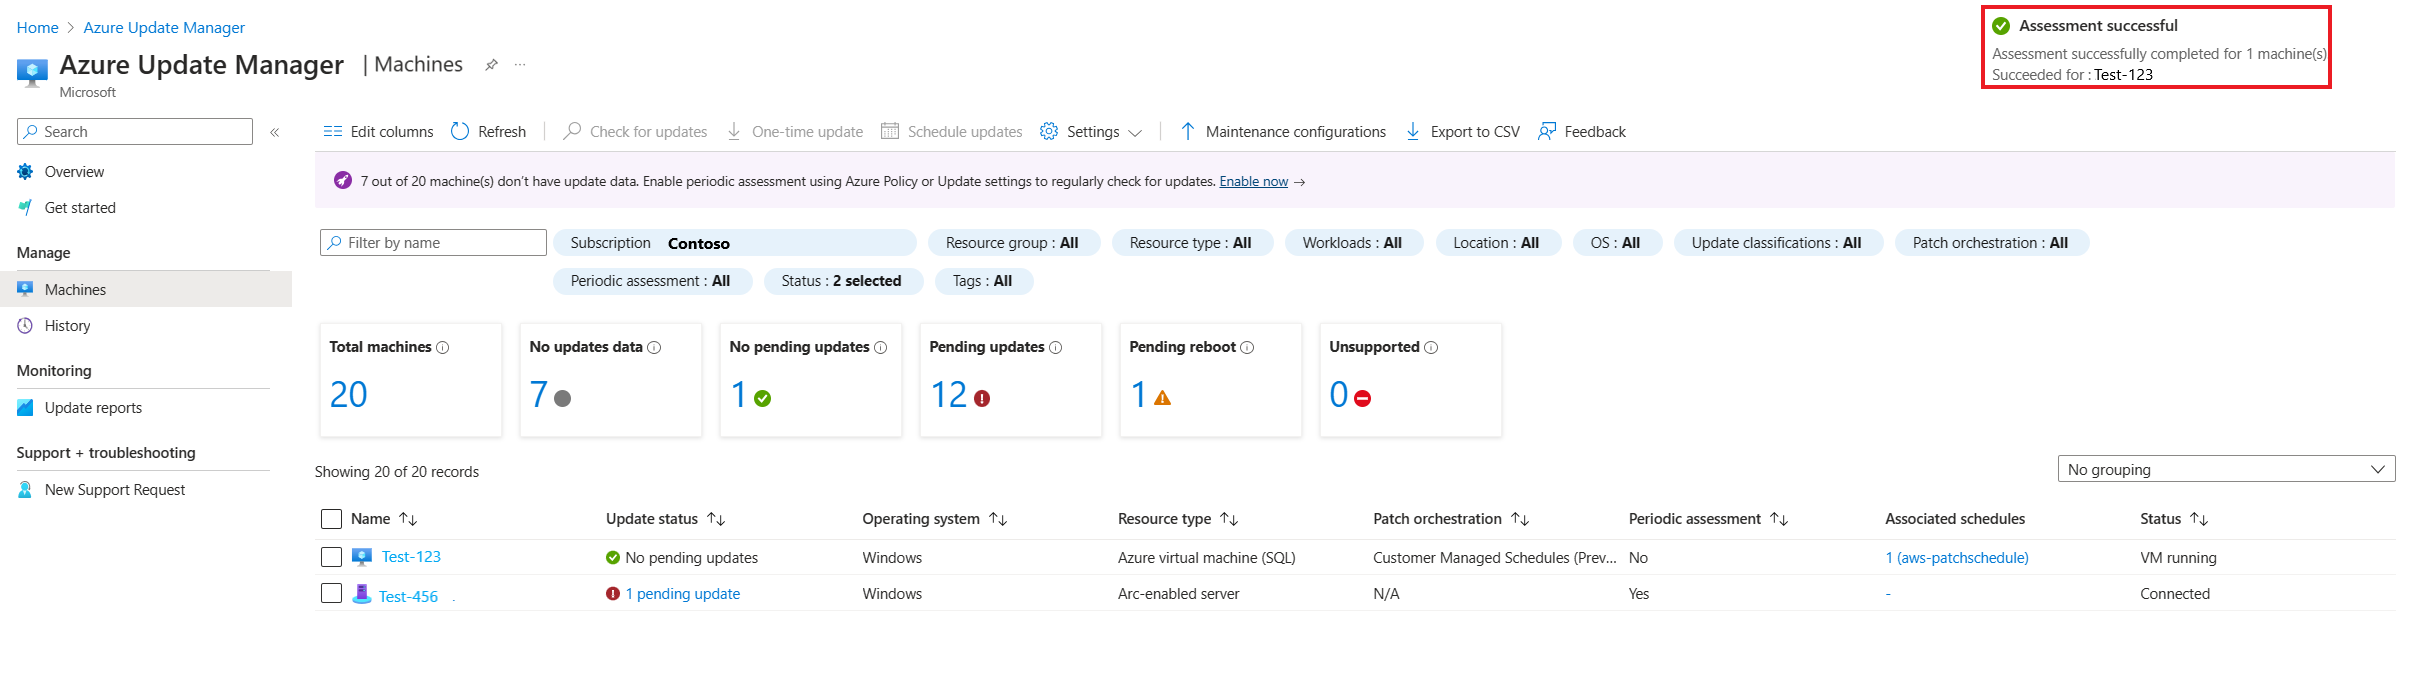 Screenshot of assessment banner on Manage Machines page.